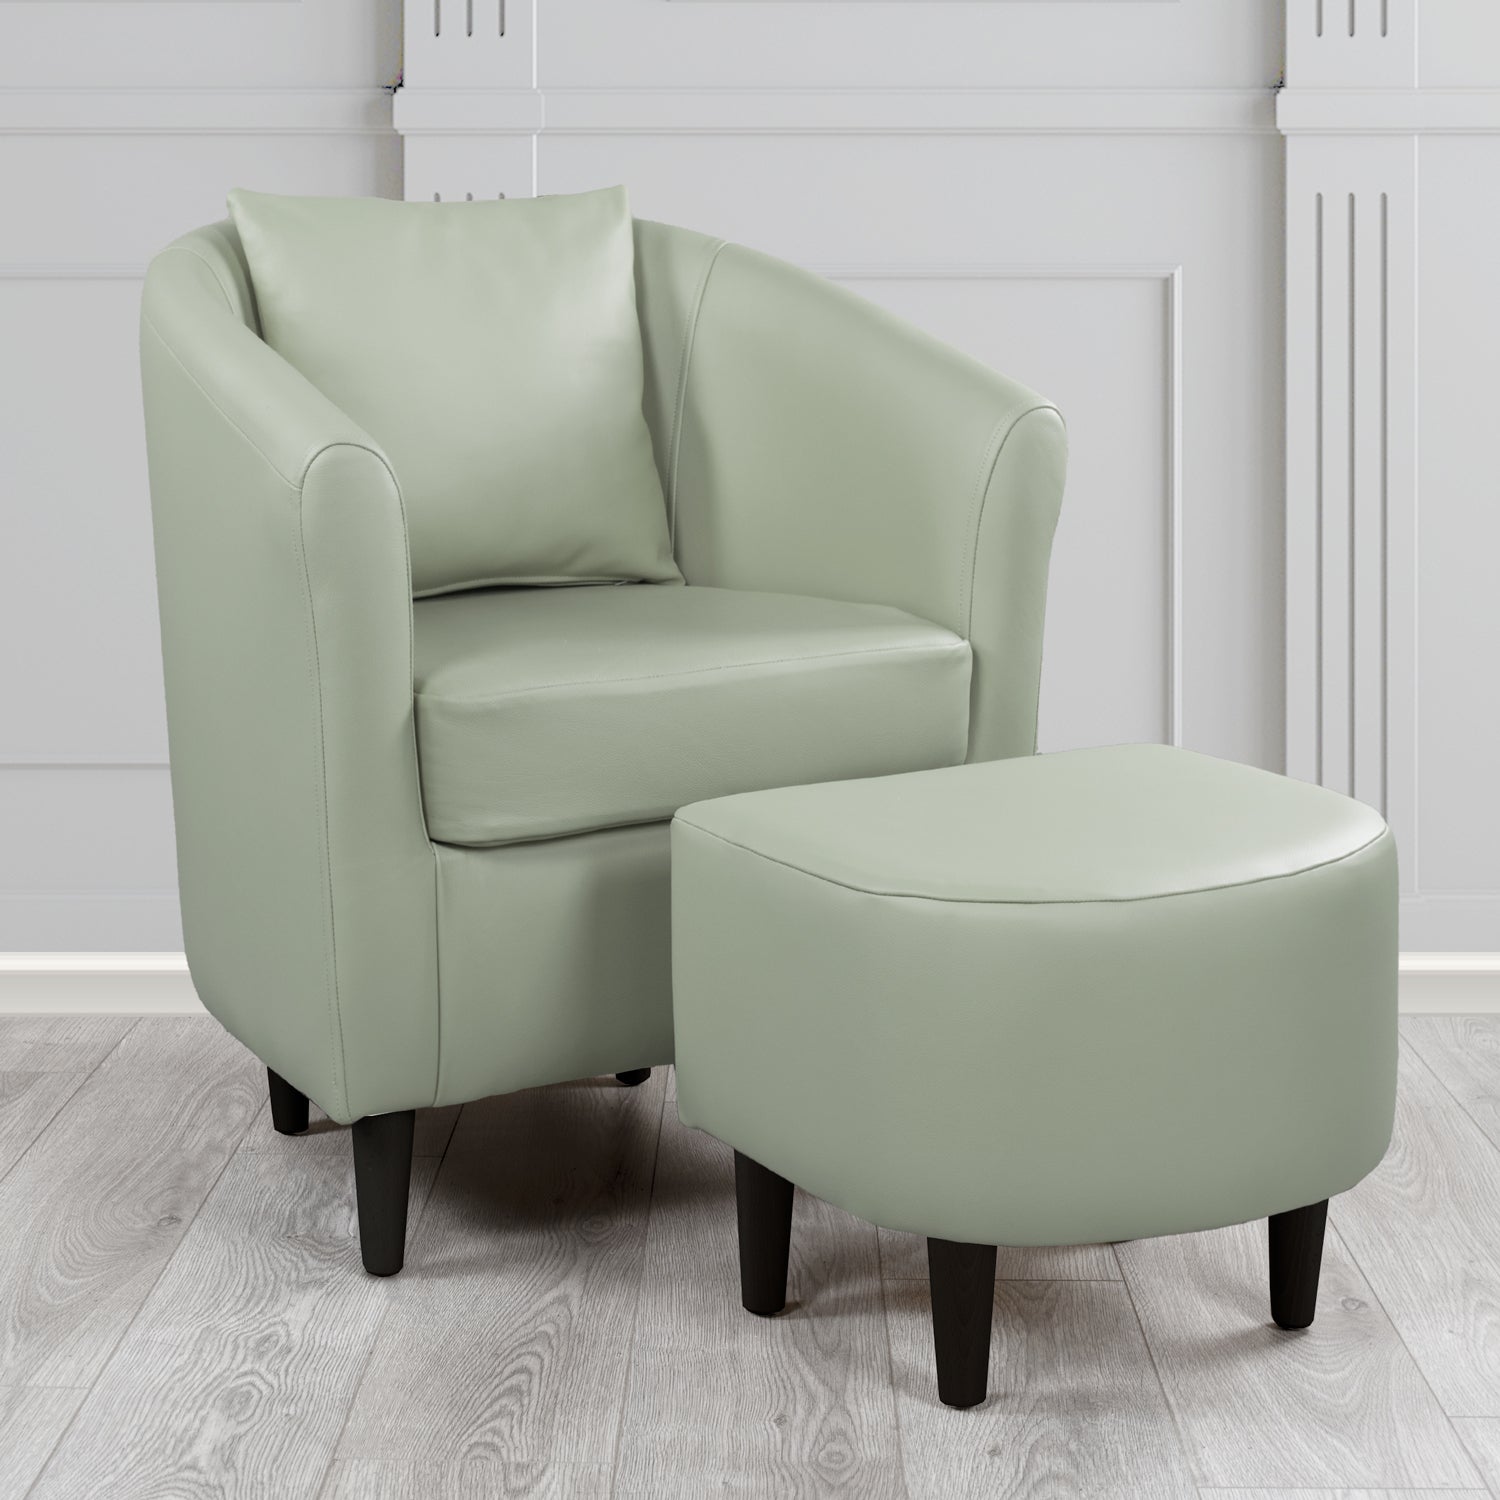 St Tropez Shelly Moon Mist Crib 5 Genuine Leather Tub Chair & Footstool Set With Scatter Cushion (6619506311210)